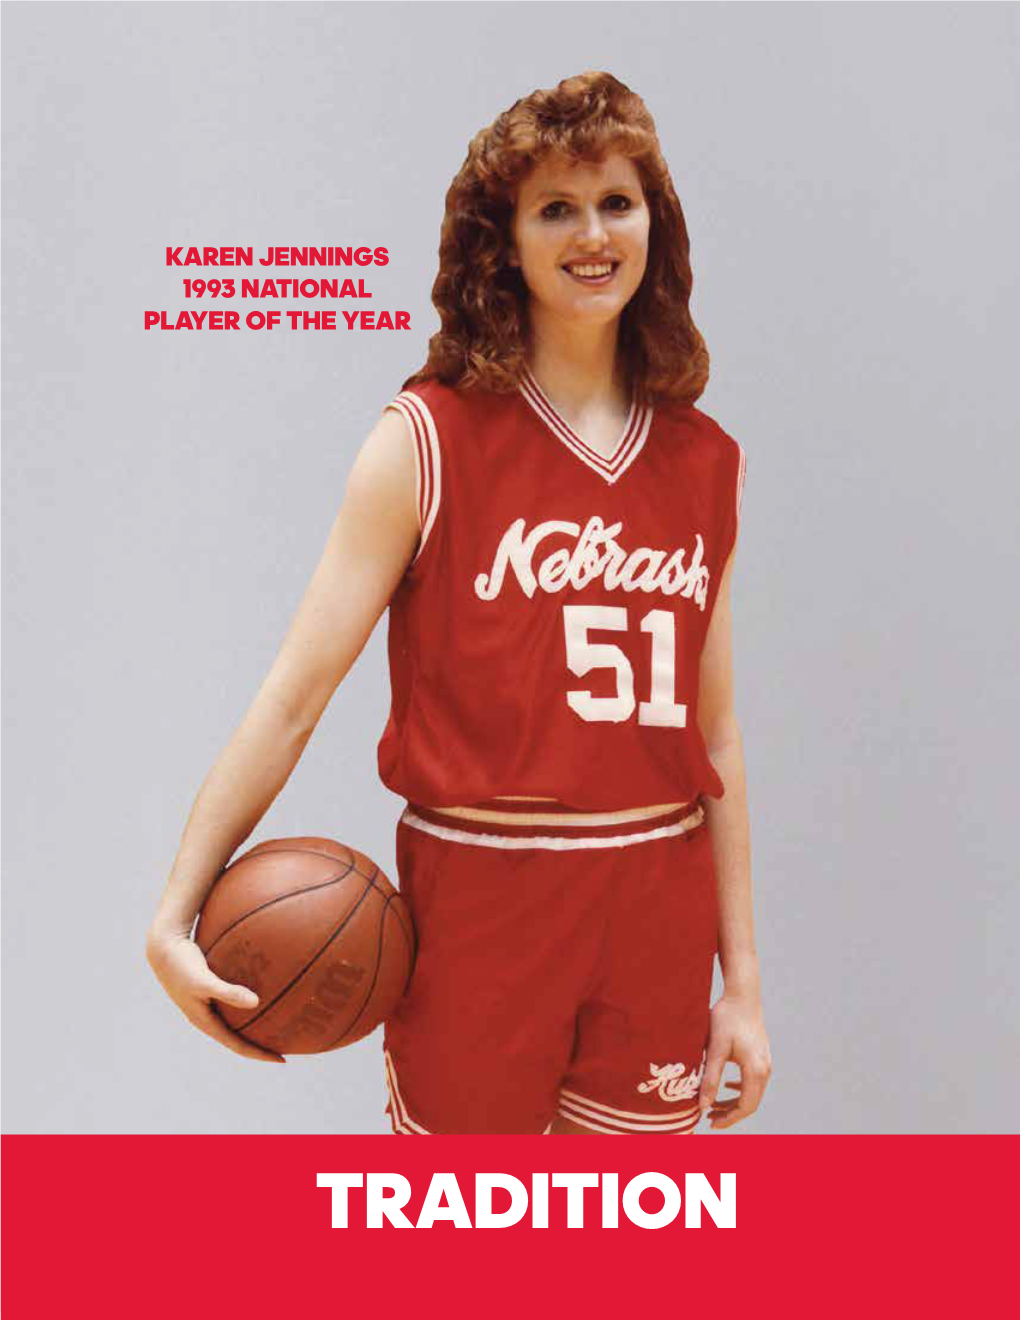 TRADITION 174 2018-19 NEBRASKA WOMEN's BASKETBALL HUSKERS GROW TRADITION with WILLIAMS by Mike Babcock & Jeff Griesch "This Team of Huskers Likes to Practice